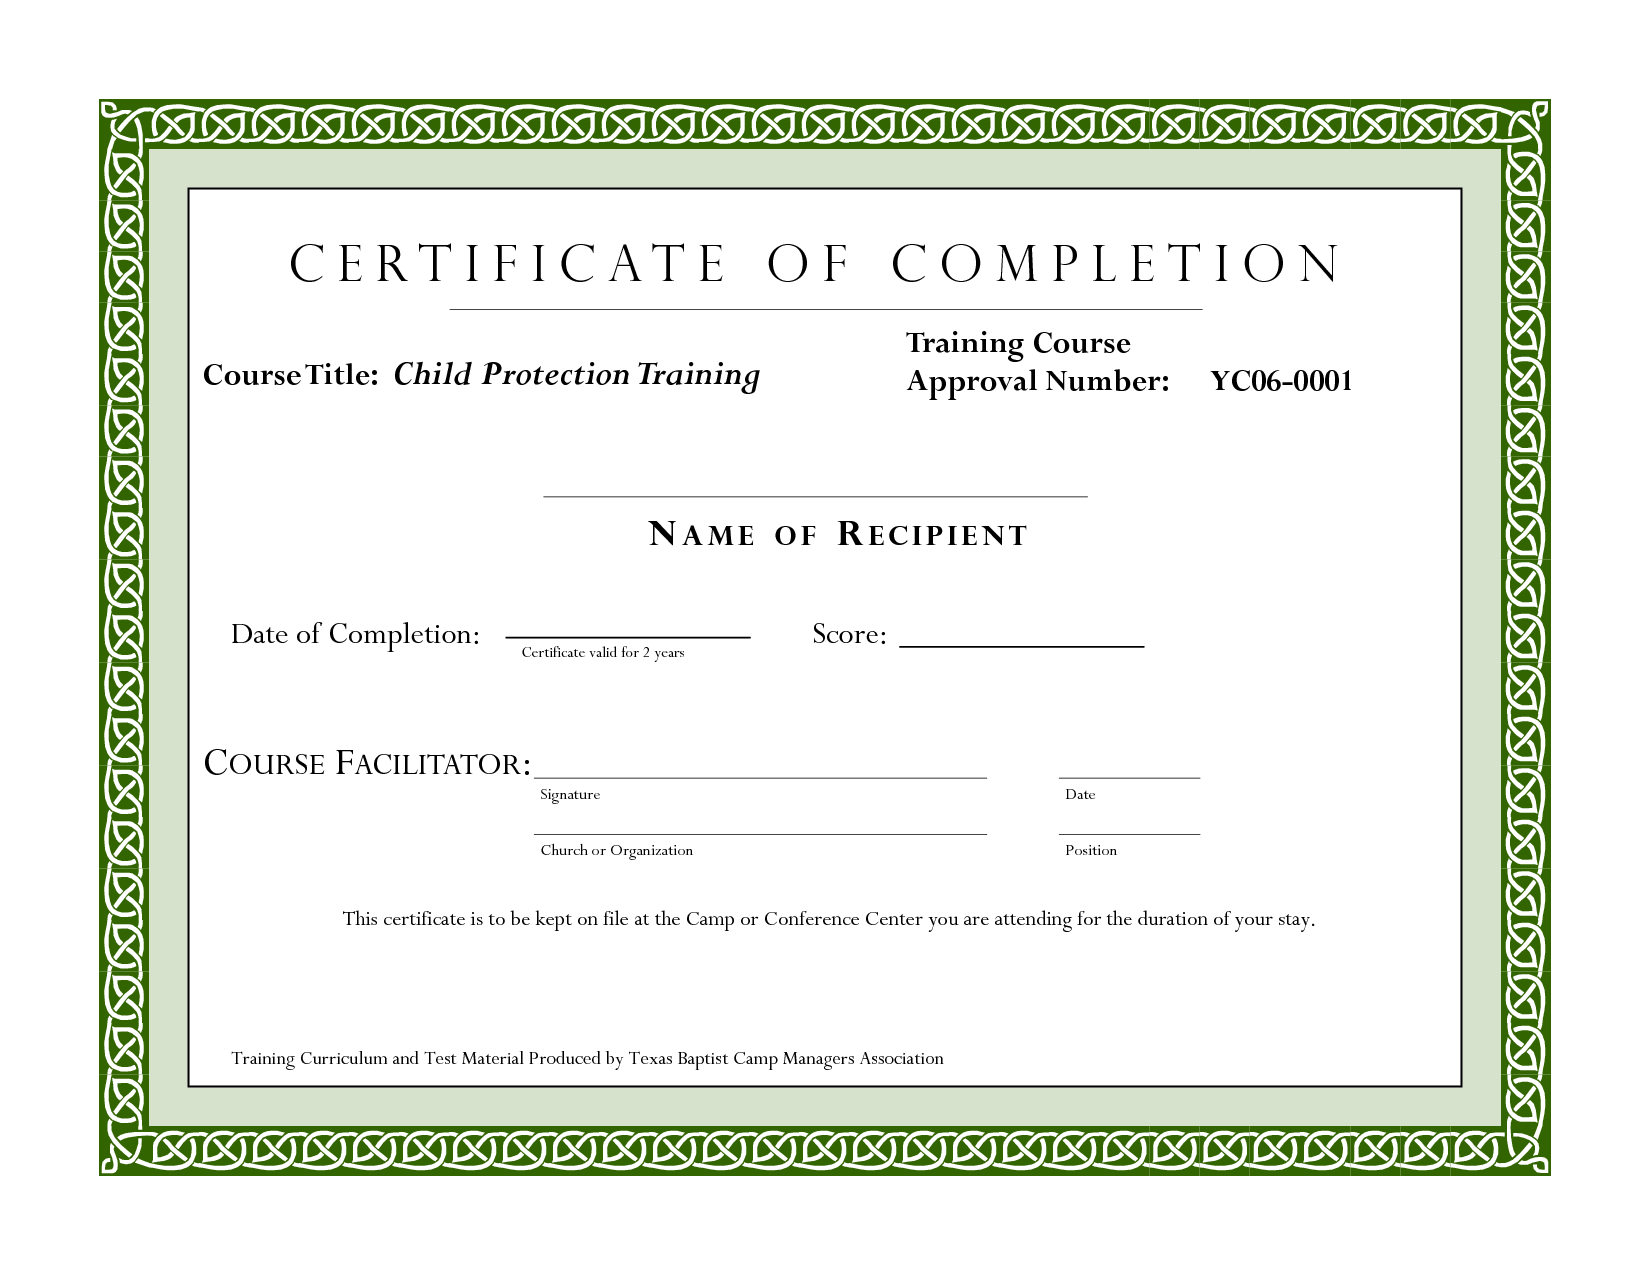 Certificates Kindergarten Printable, Birth Certificate With Safe Driving Certificate Template